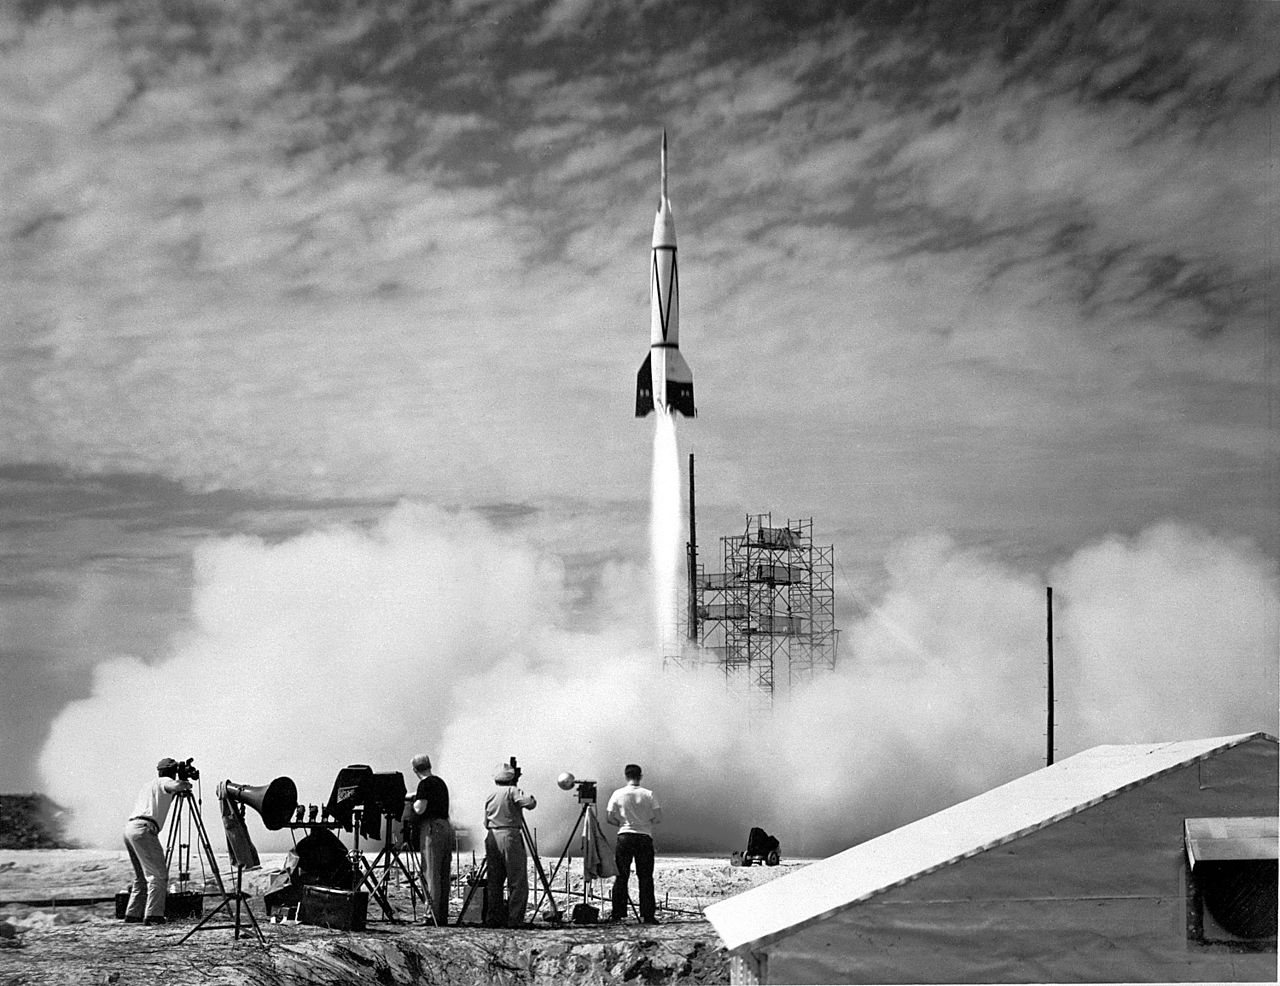 In July 1950 the first Bumper rocketis launched from Cape Canaveral, Florida.